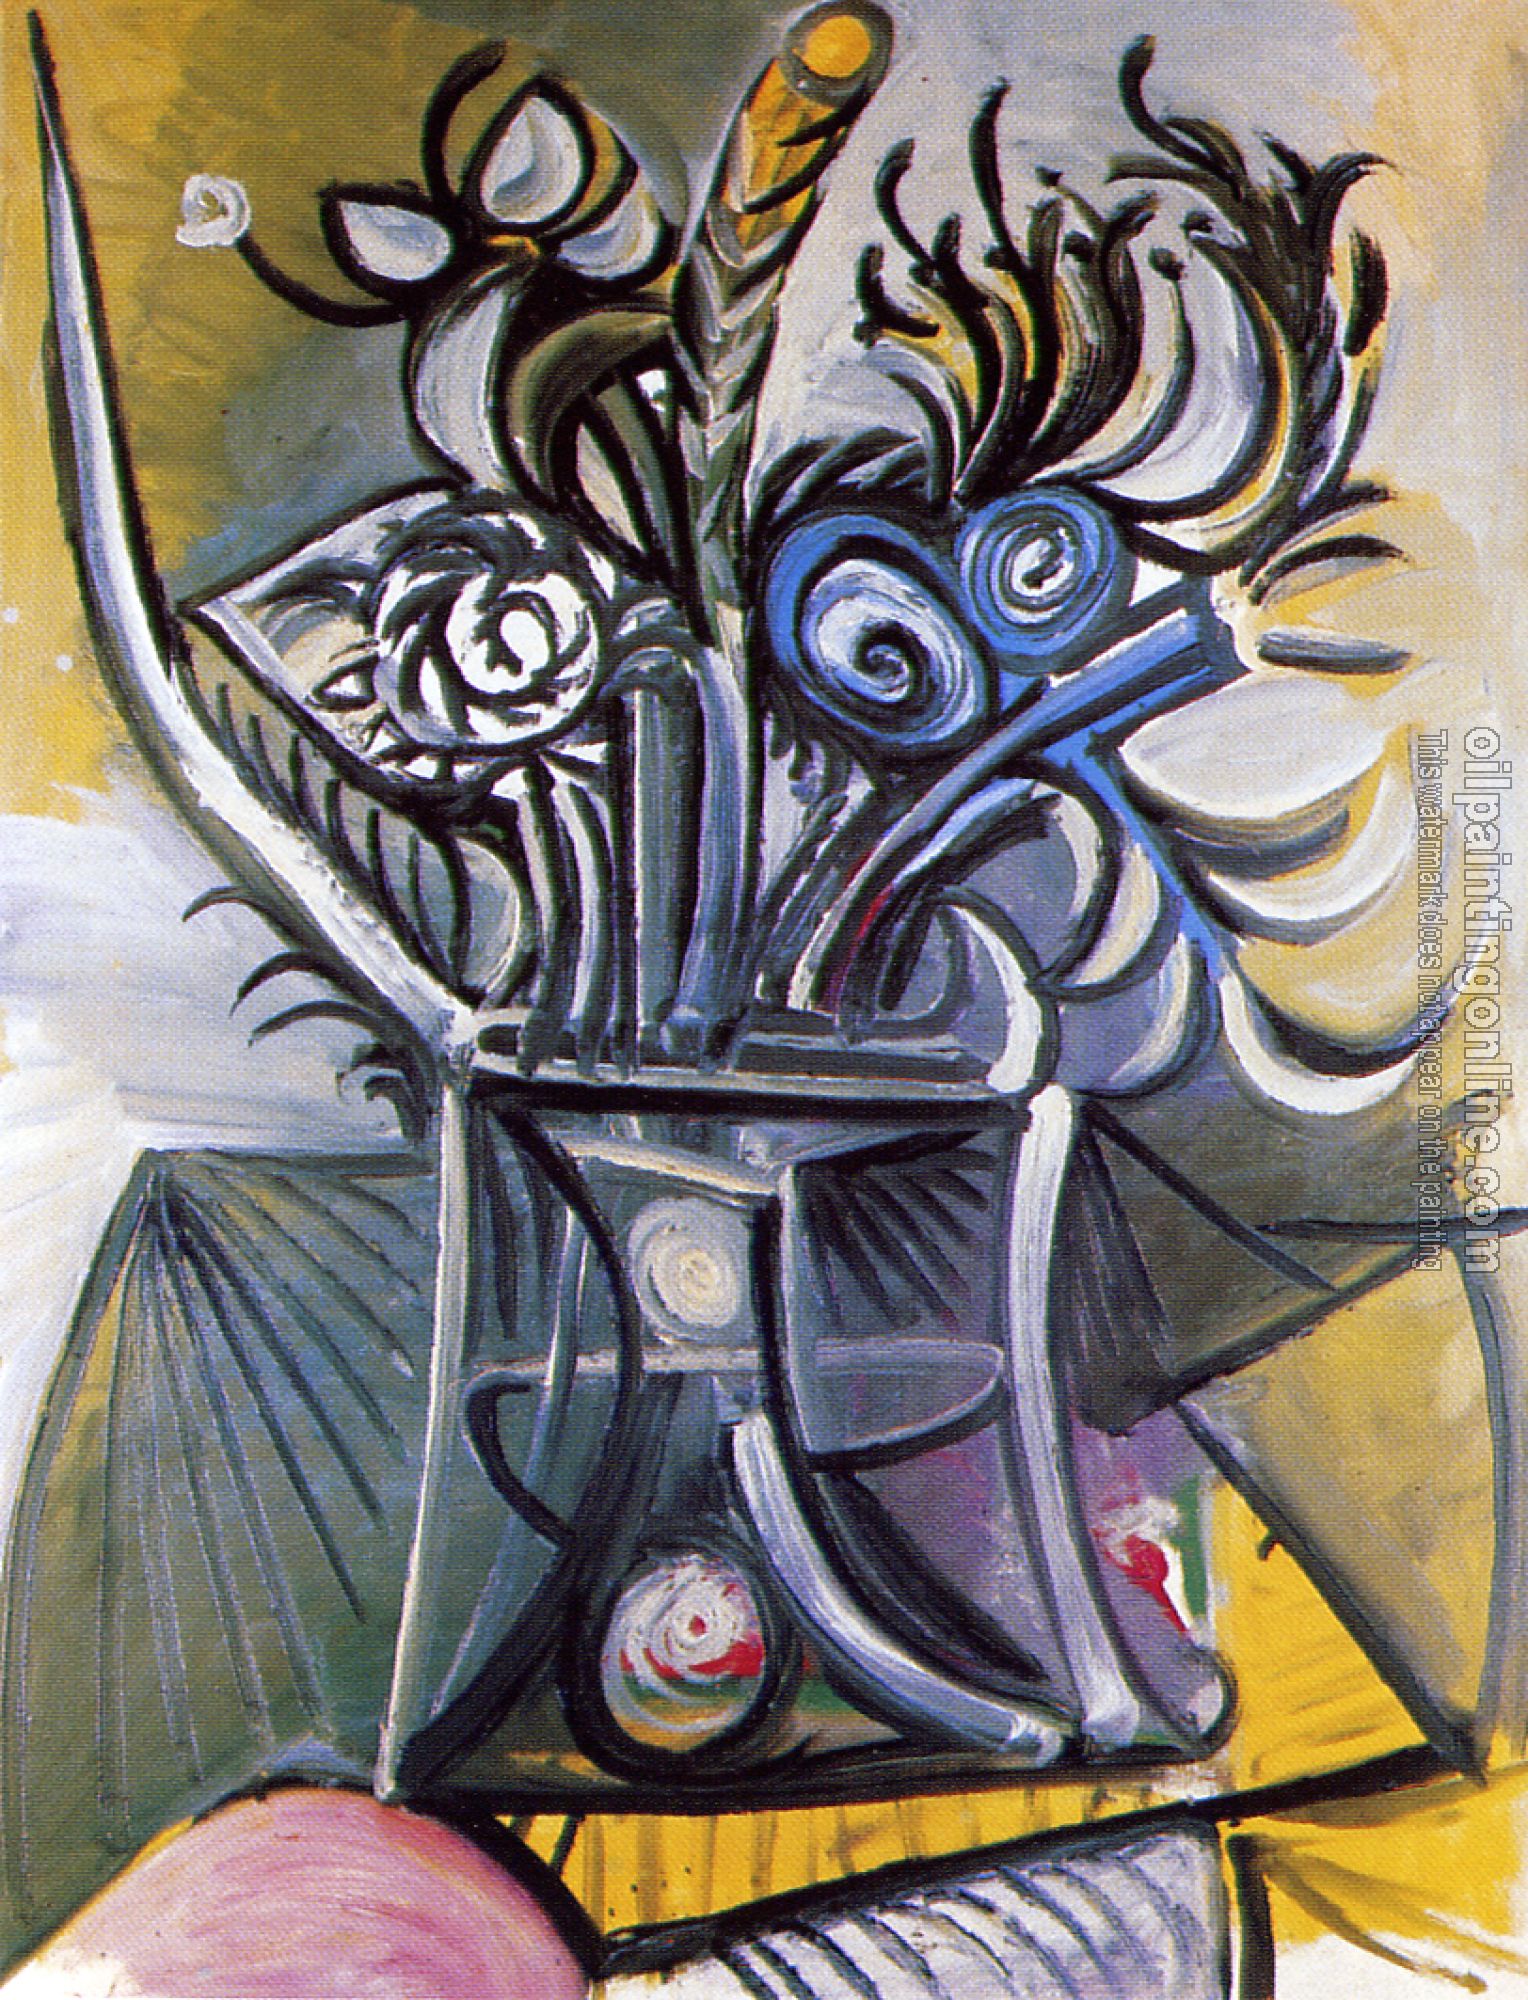 Picasso, Pablo - vase of flowers on a table